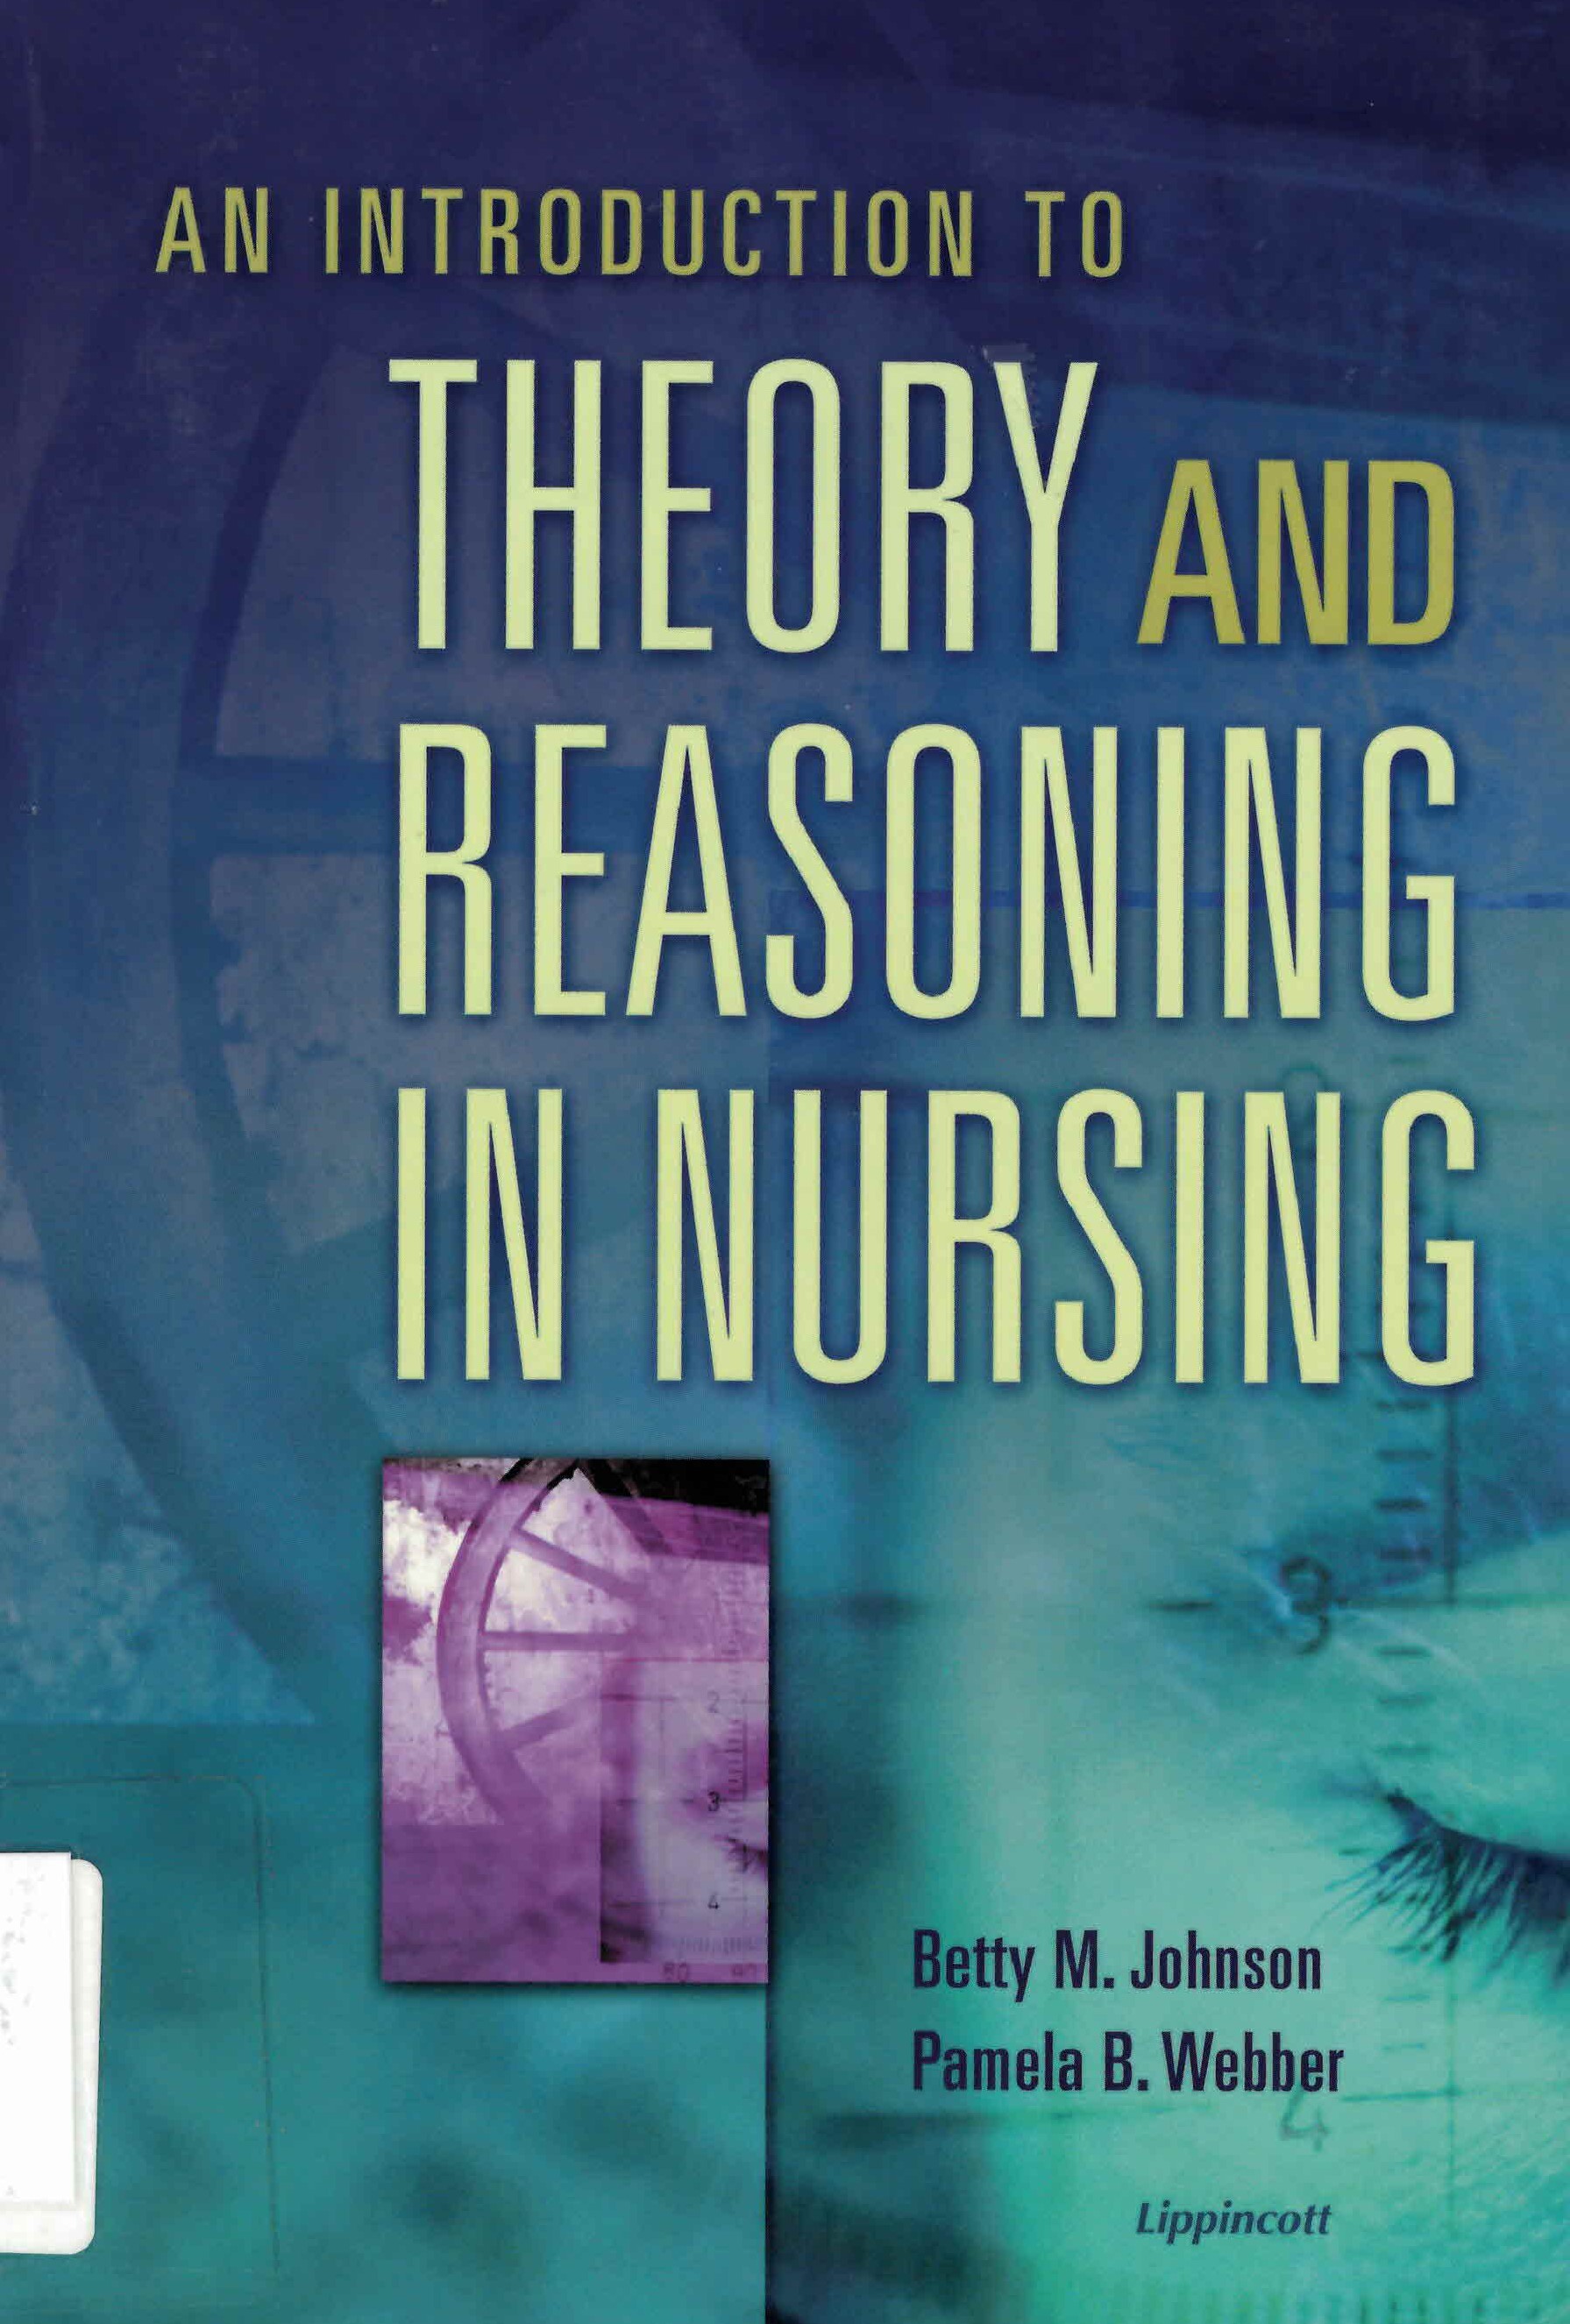 An introduction to theory and reasoning in nursing